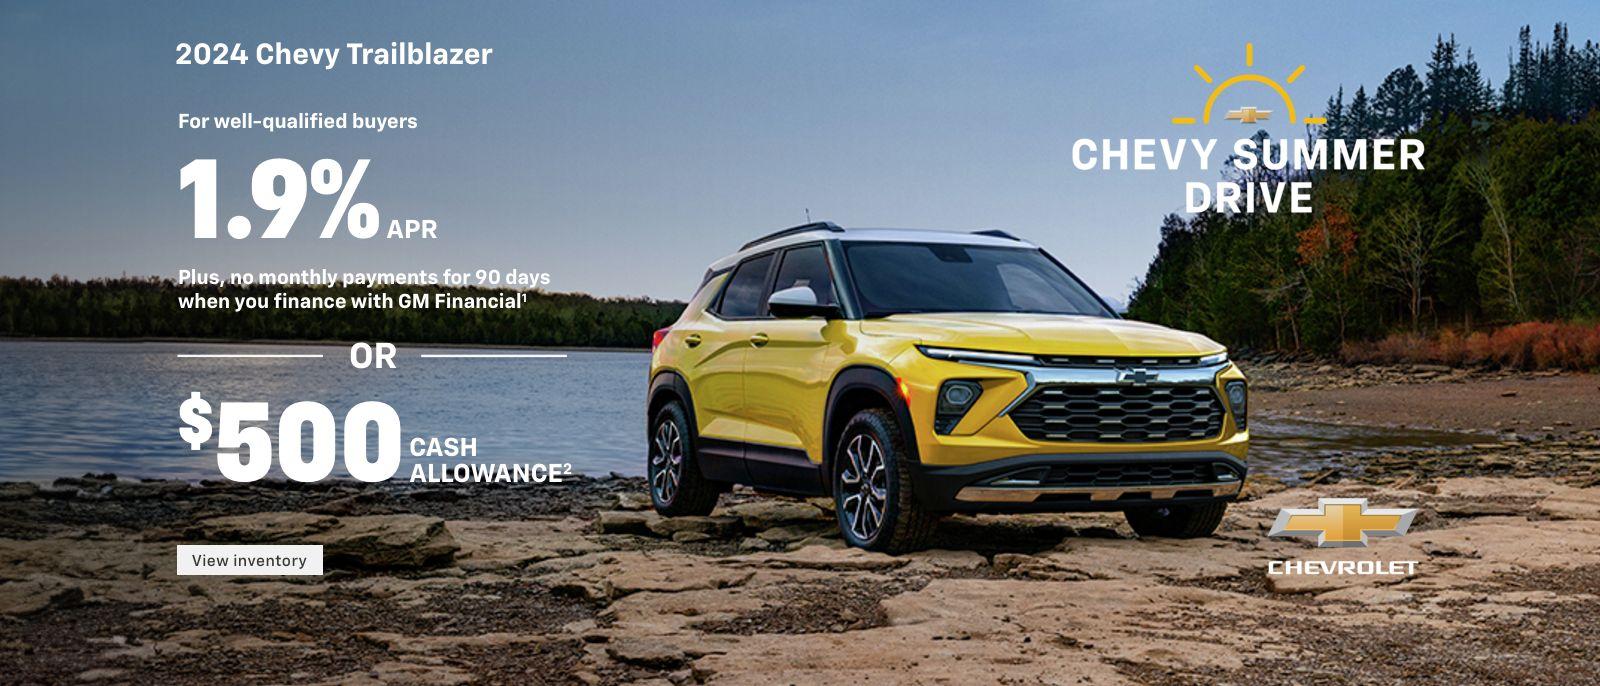 2024 Chevy Trailblazer. For well-qualified buyers 1.9% APR + no monthly payments for 90 DAYS when you finance with GM Financial. Or, $500 cash allowance.